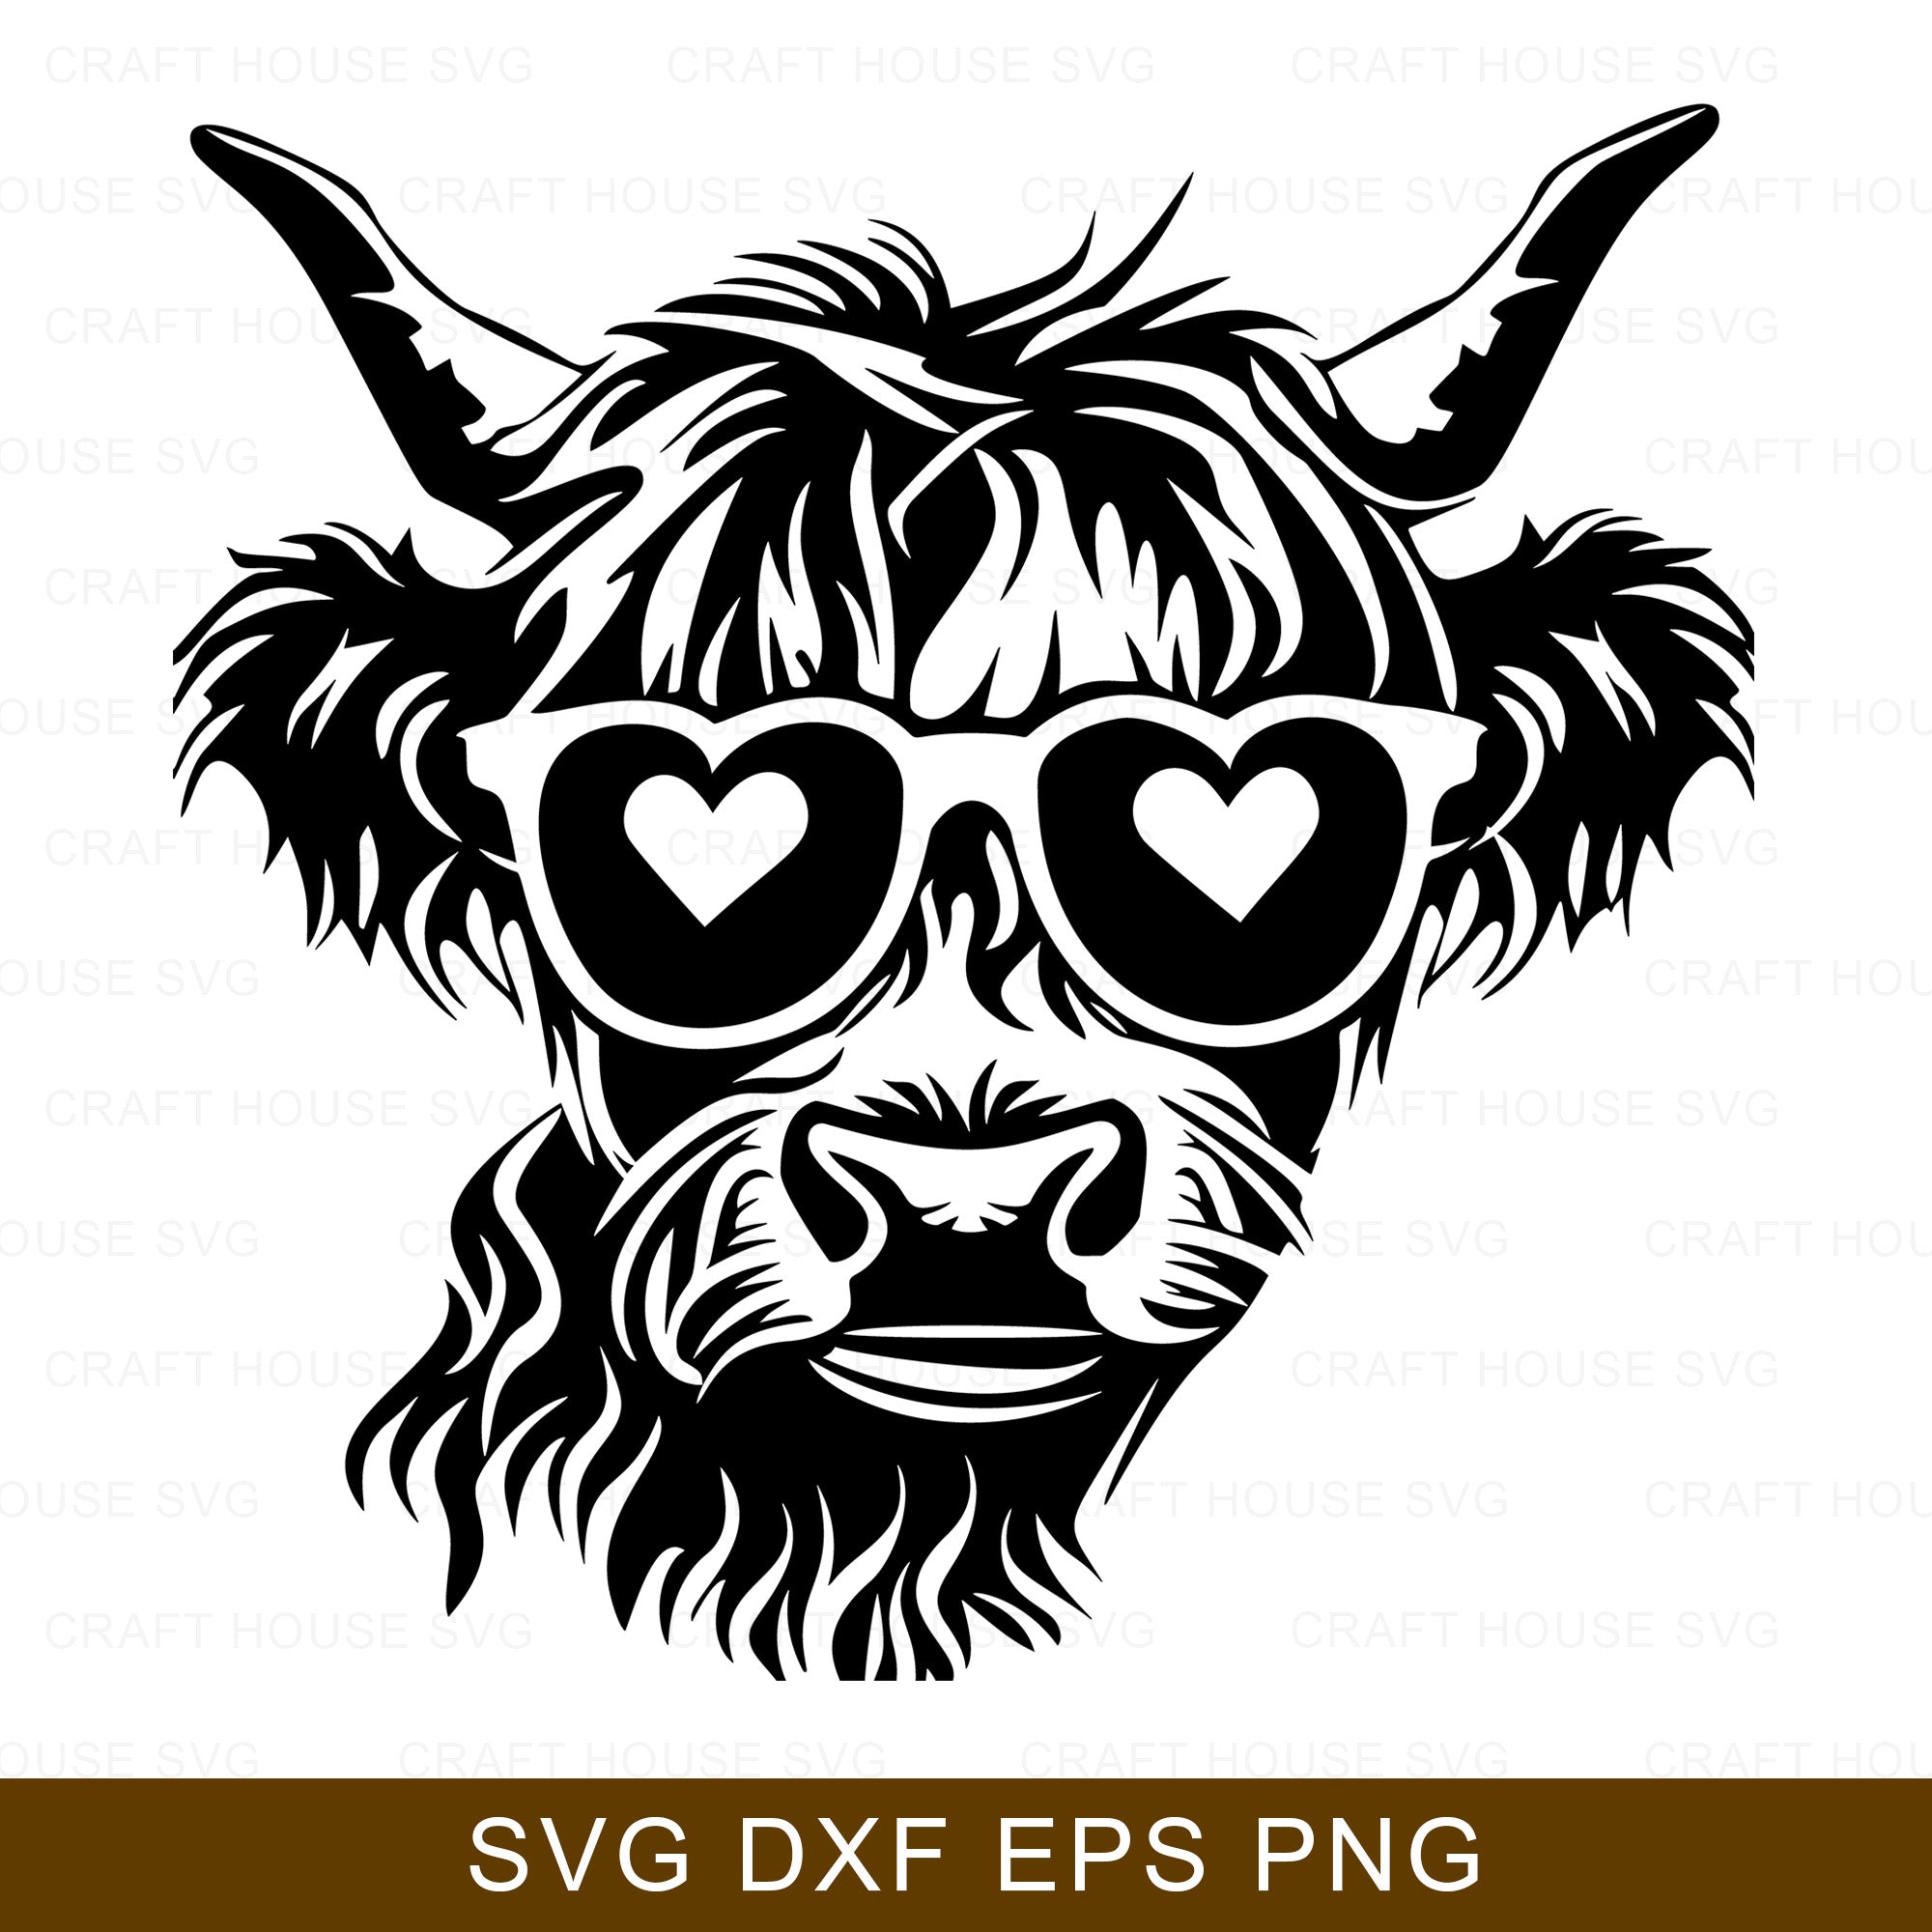 Highland Cow with Heart Shaped Glasses SVG